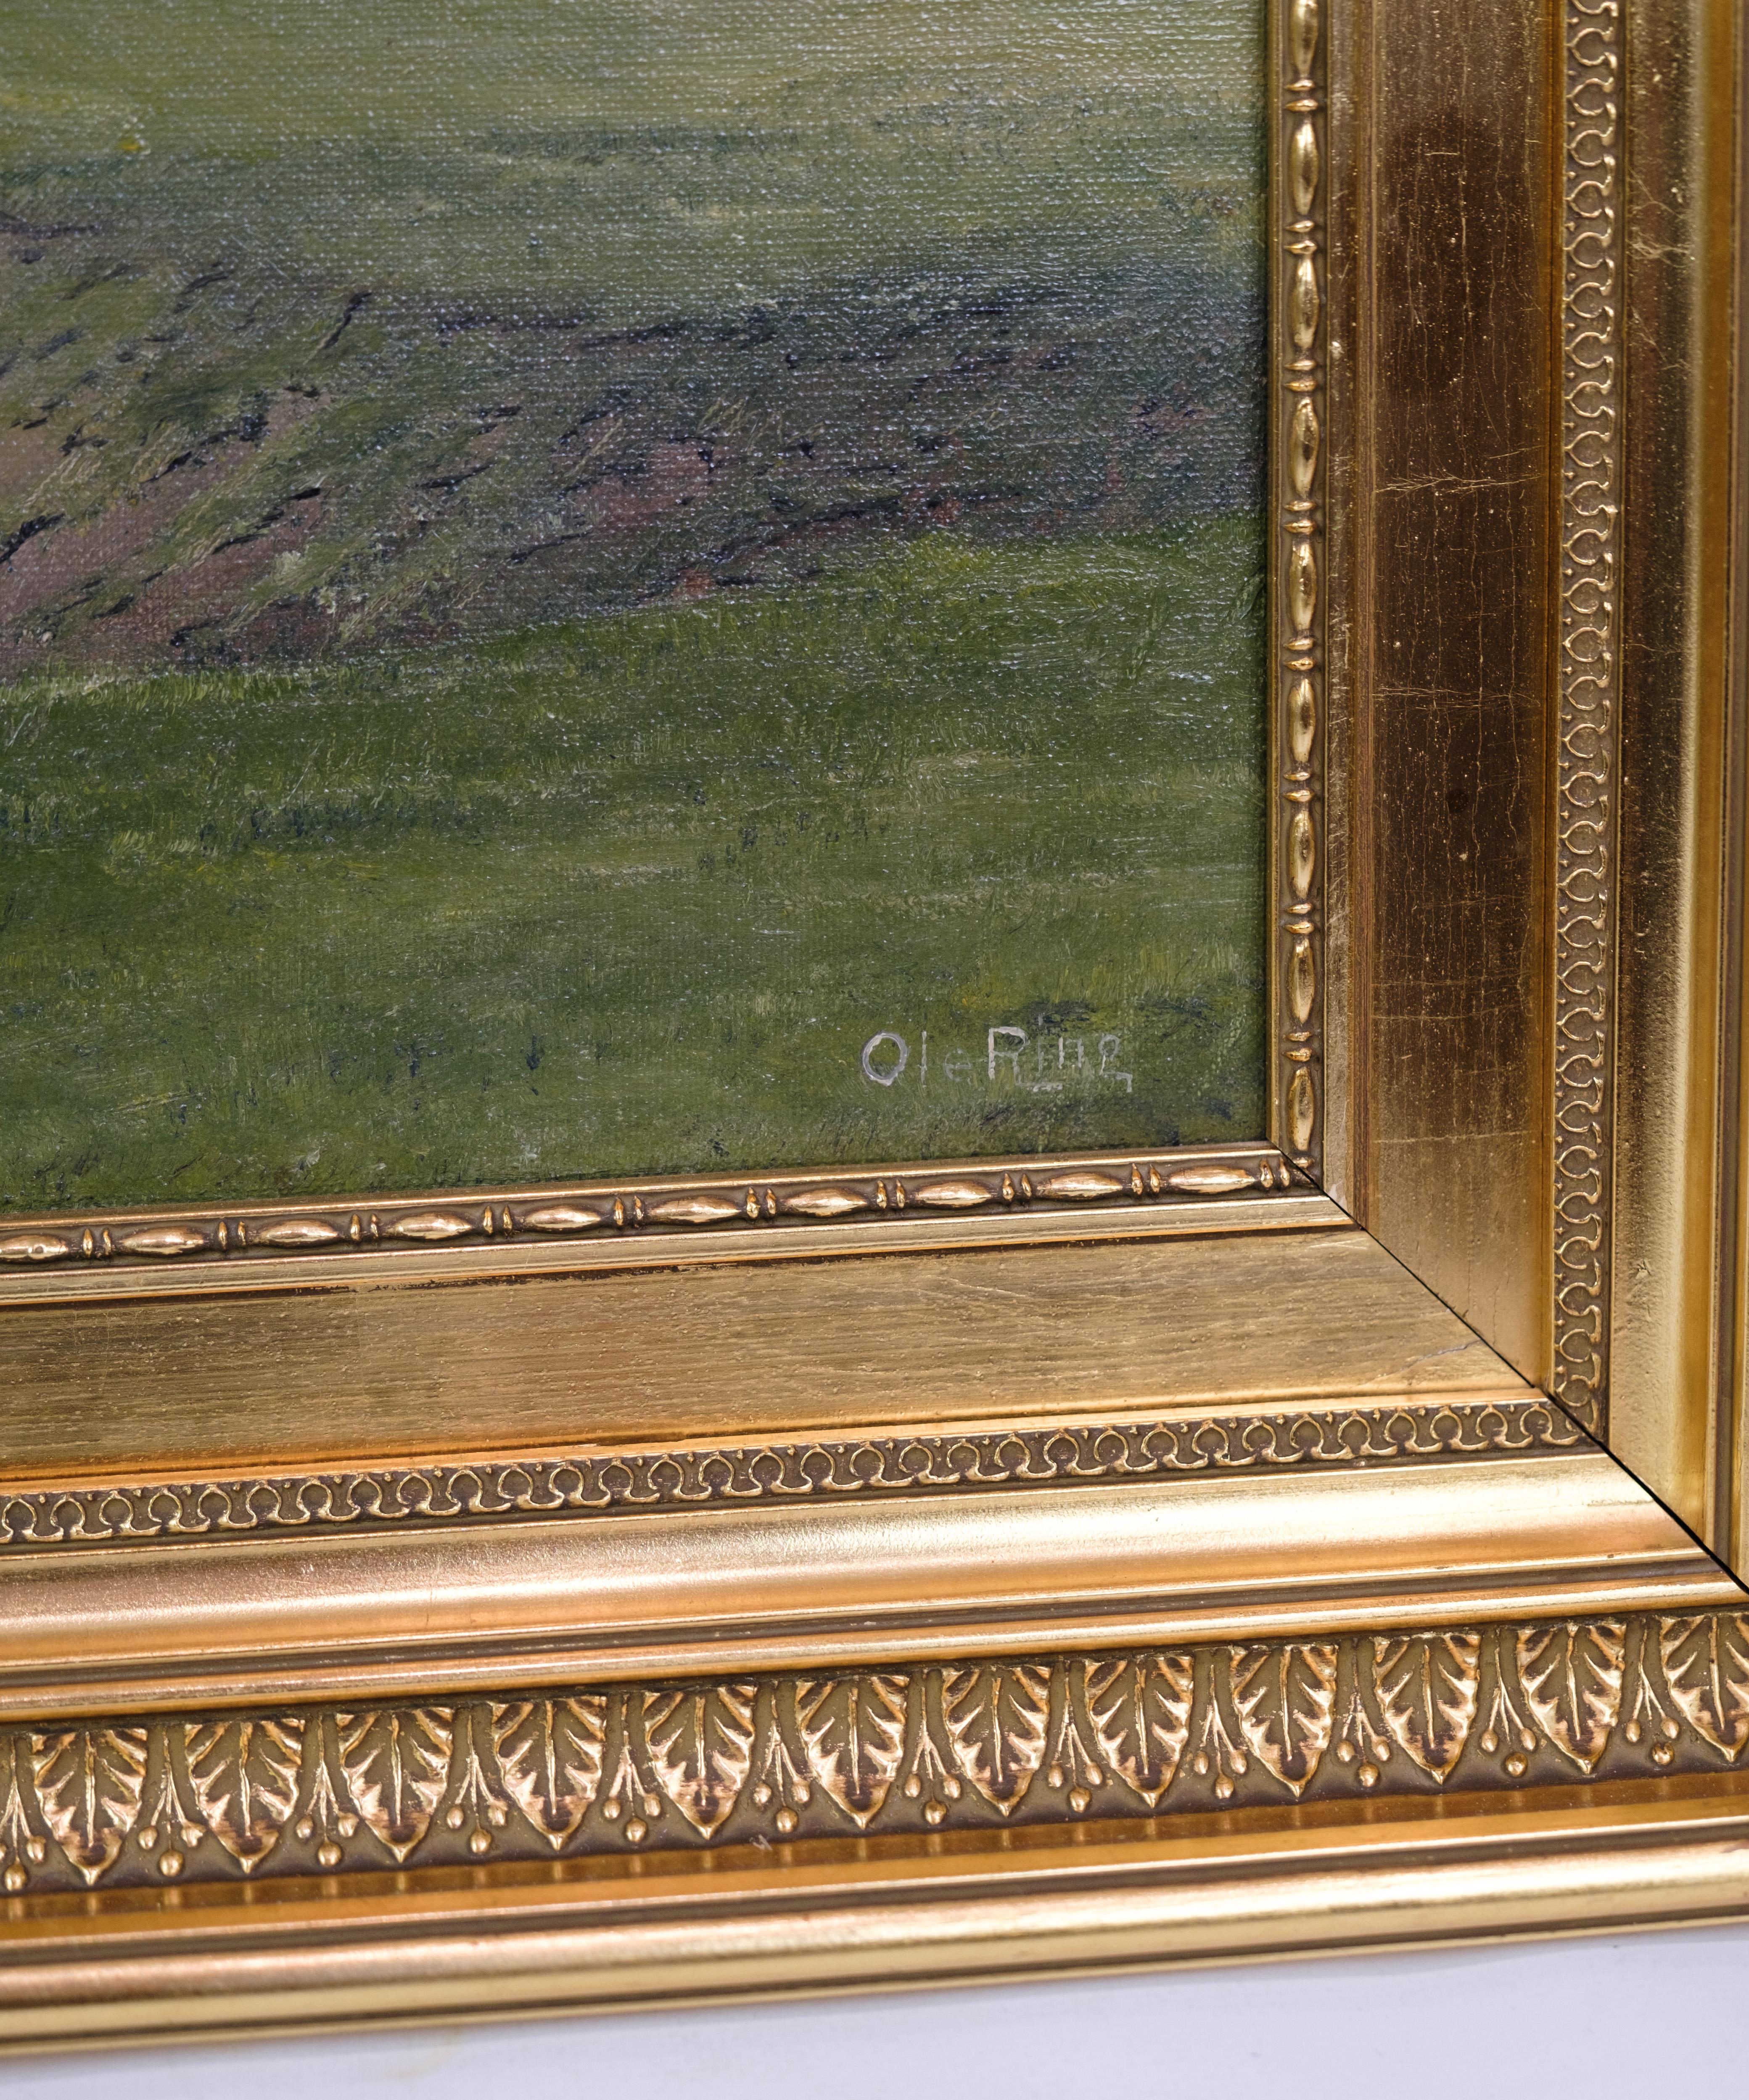 Landscape painting with gold leaf frame painted by the artist Ole Ring (b.1902-d.1972), who lived in the Roskilde, Denmark area. The picture presumably illustrates the landscape around Boserup forest, which is written on the back.
H: 55.5 W: 67